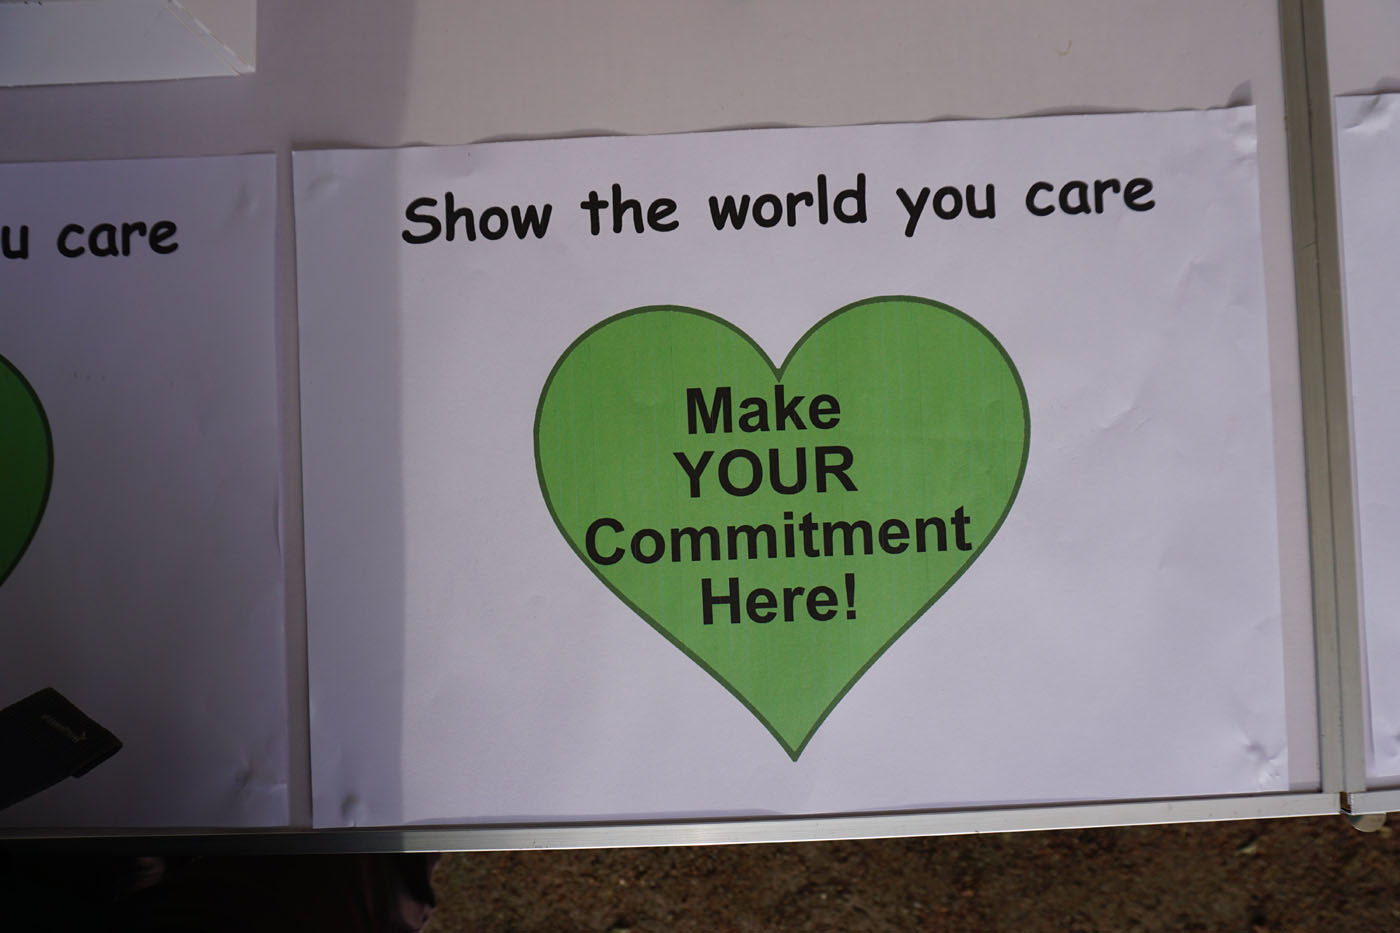 Photograph of a poster "Show the world you care - Make your commitment here"